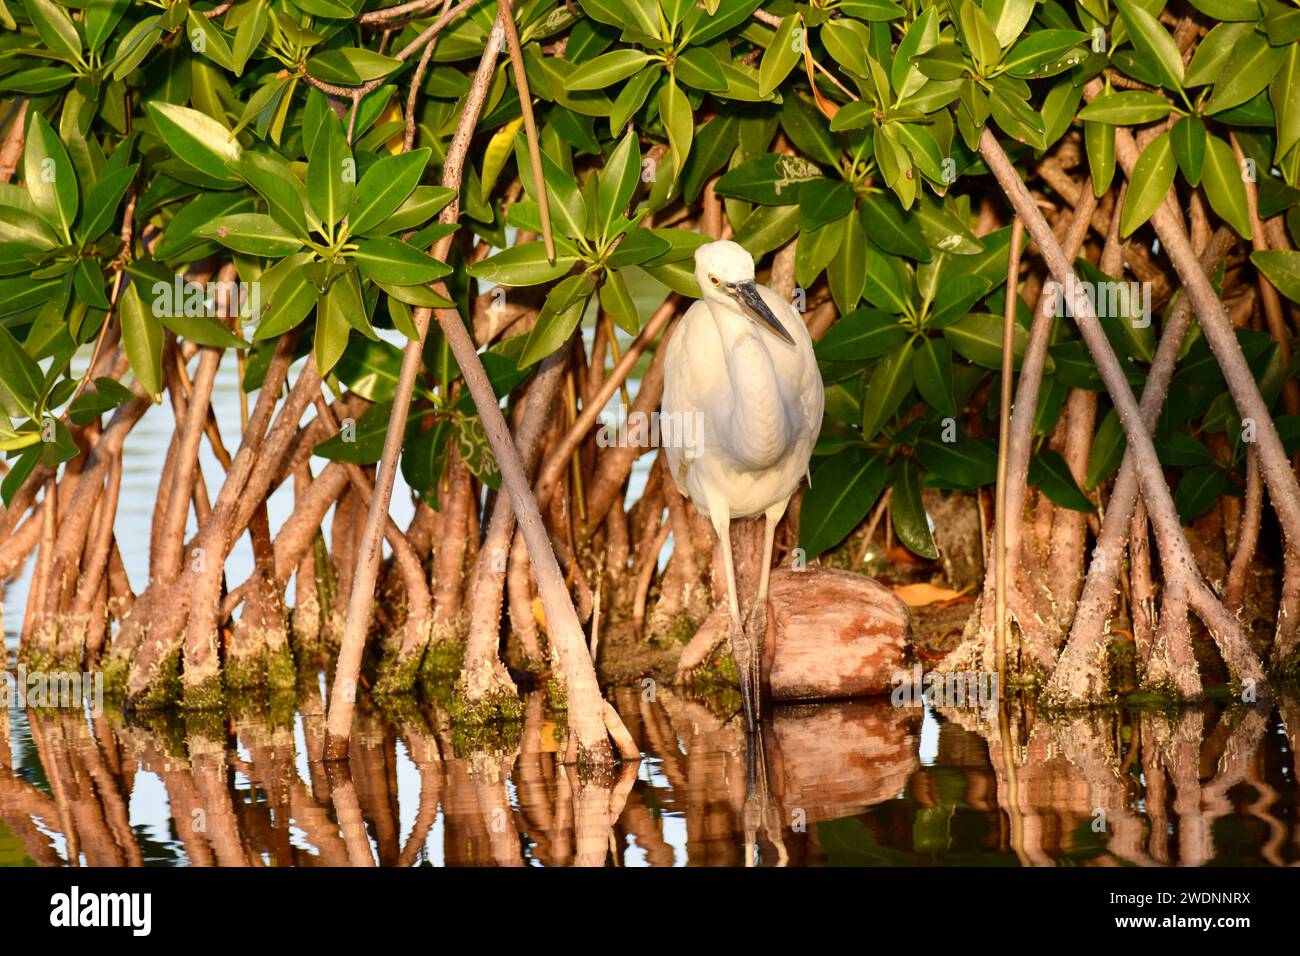 A Great blue heron (Ardea herodias), white morph, among the mangrove bushes in the late afternoon in San Pedro, Ambergris Caye, Belize. Stock Photo